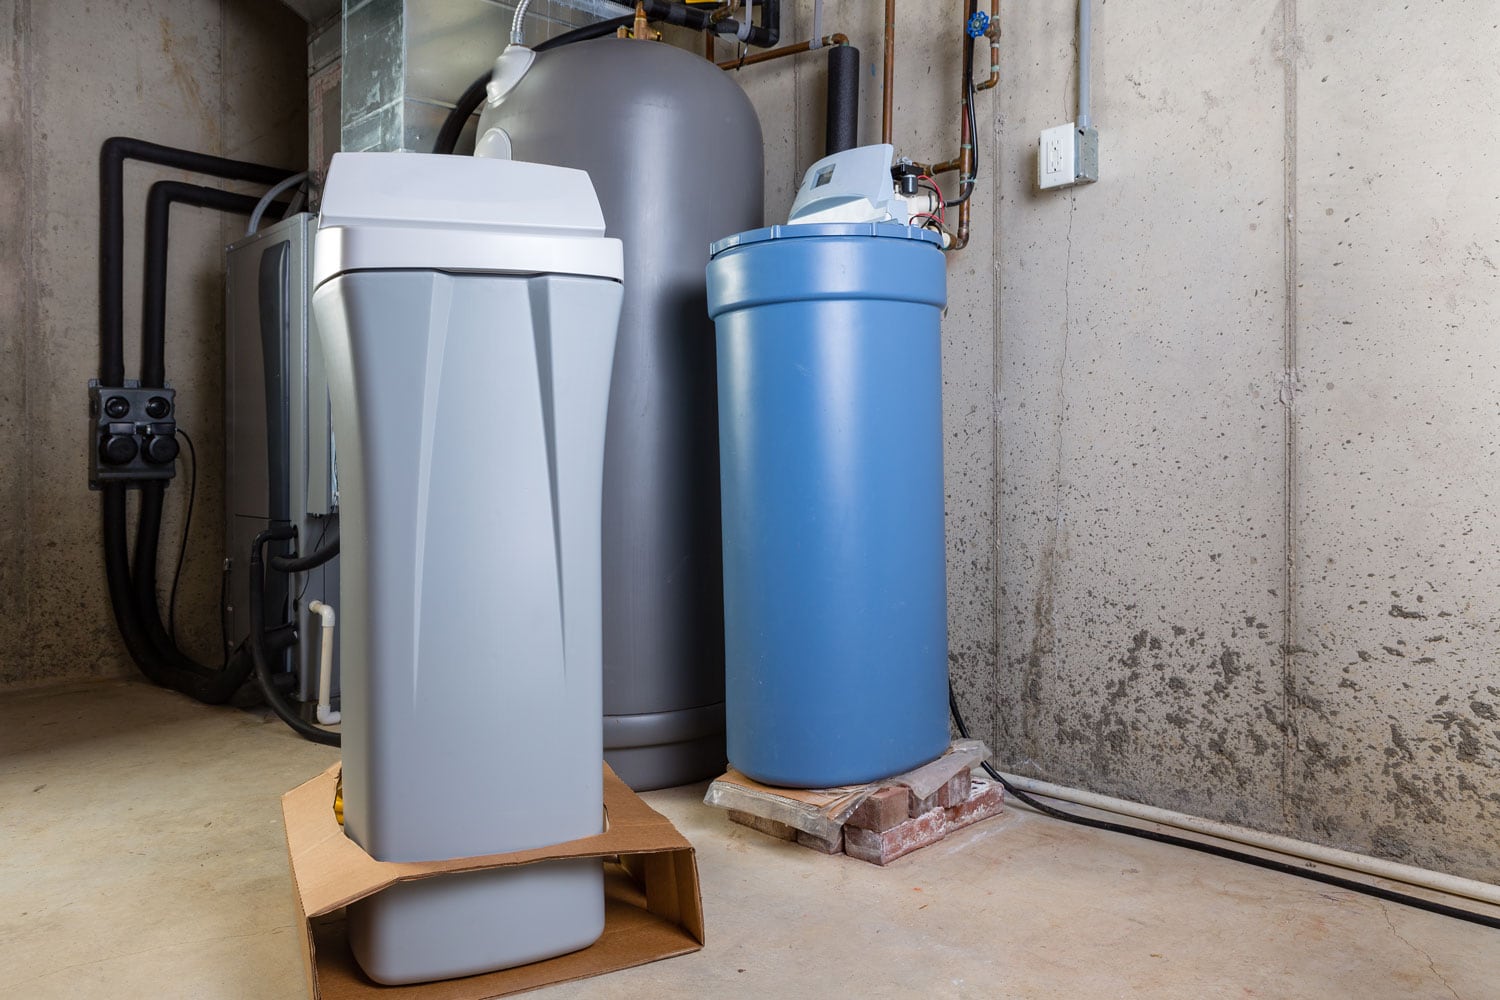 Water heater containers inside a boiler room